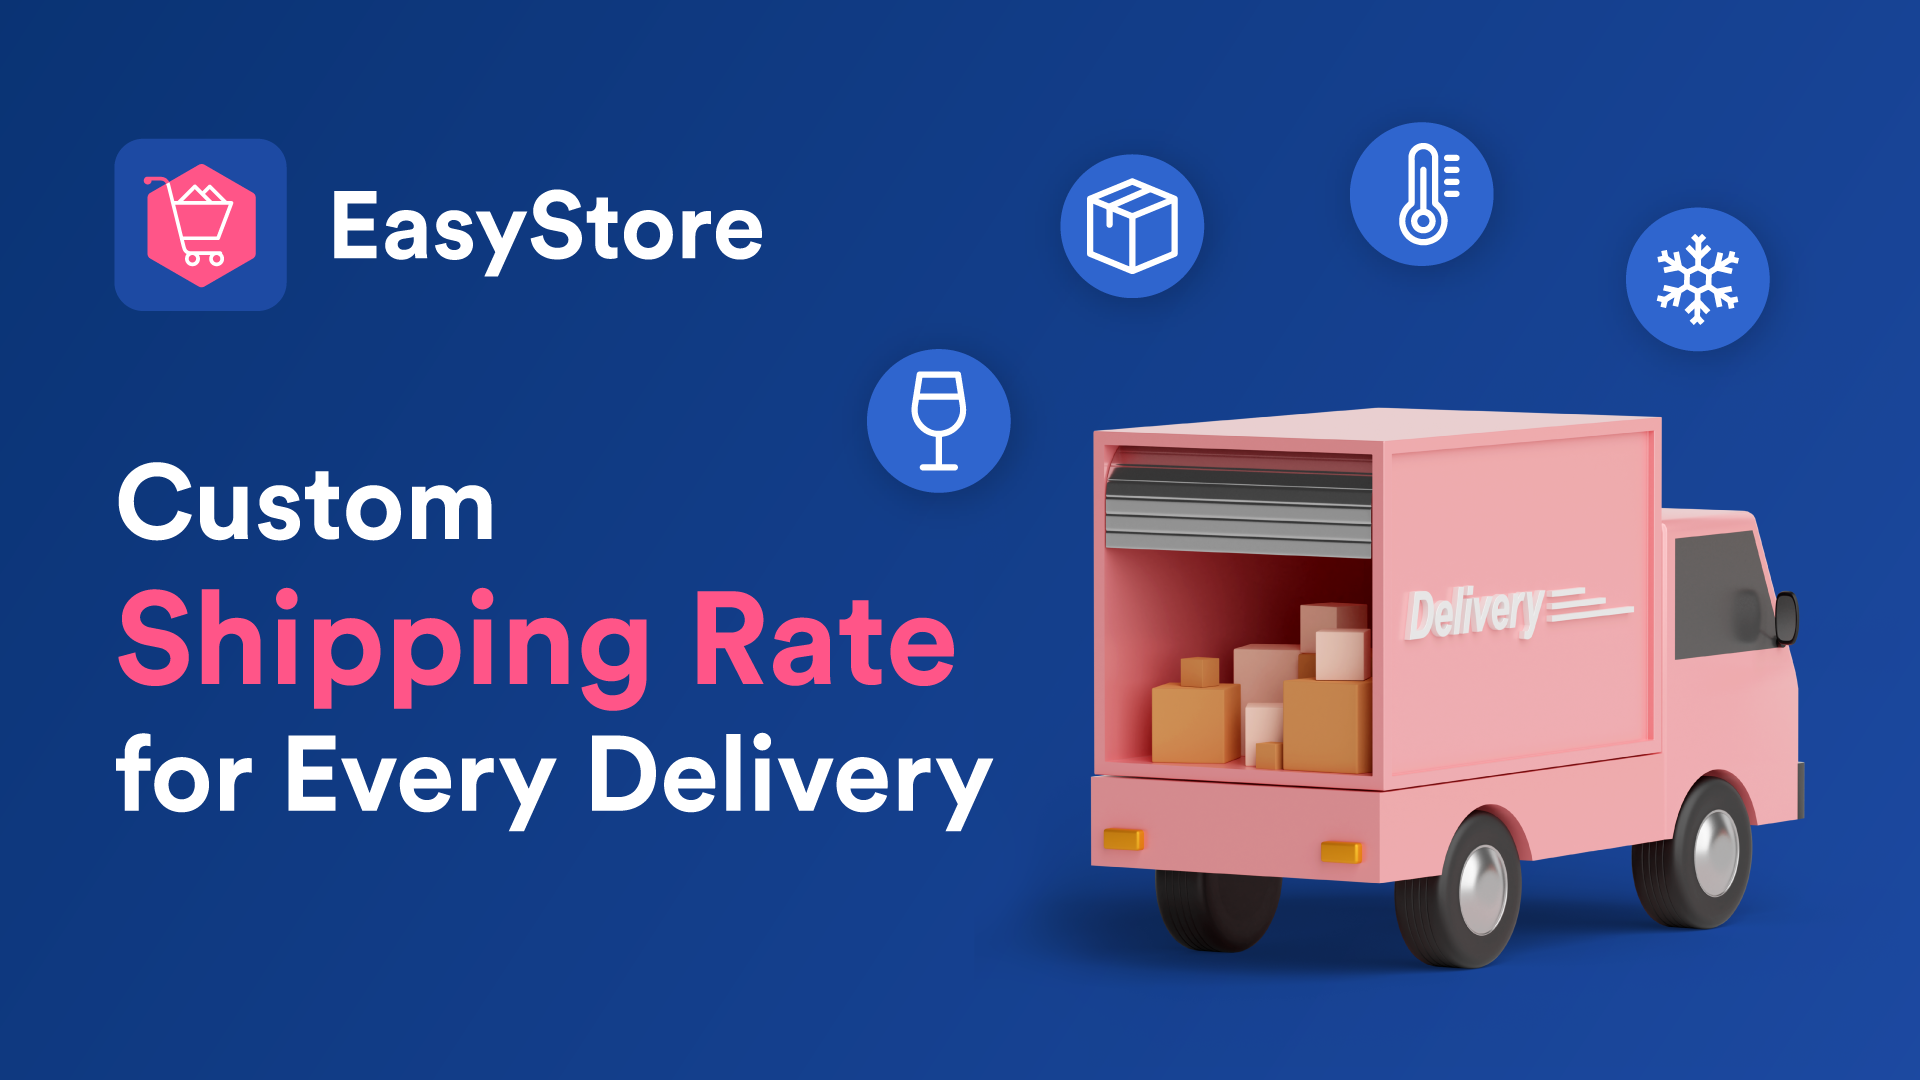 Set Custom Shipping Rate Based on Products | EasyStore